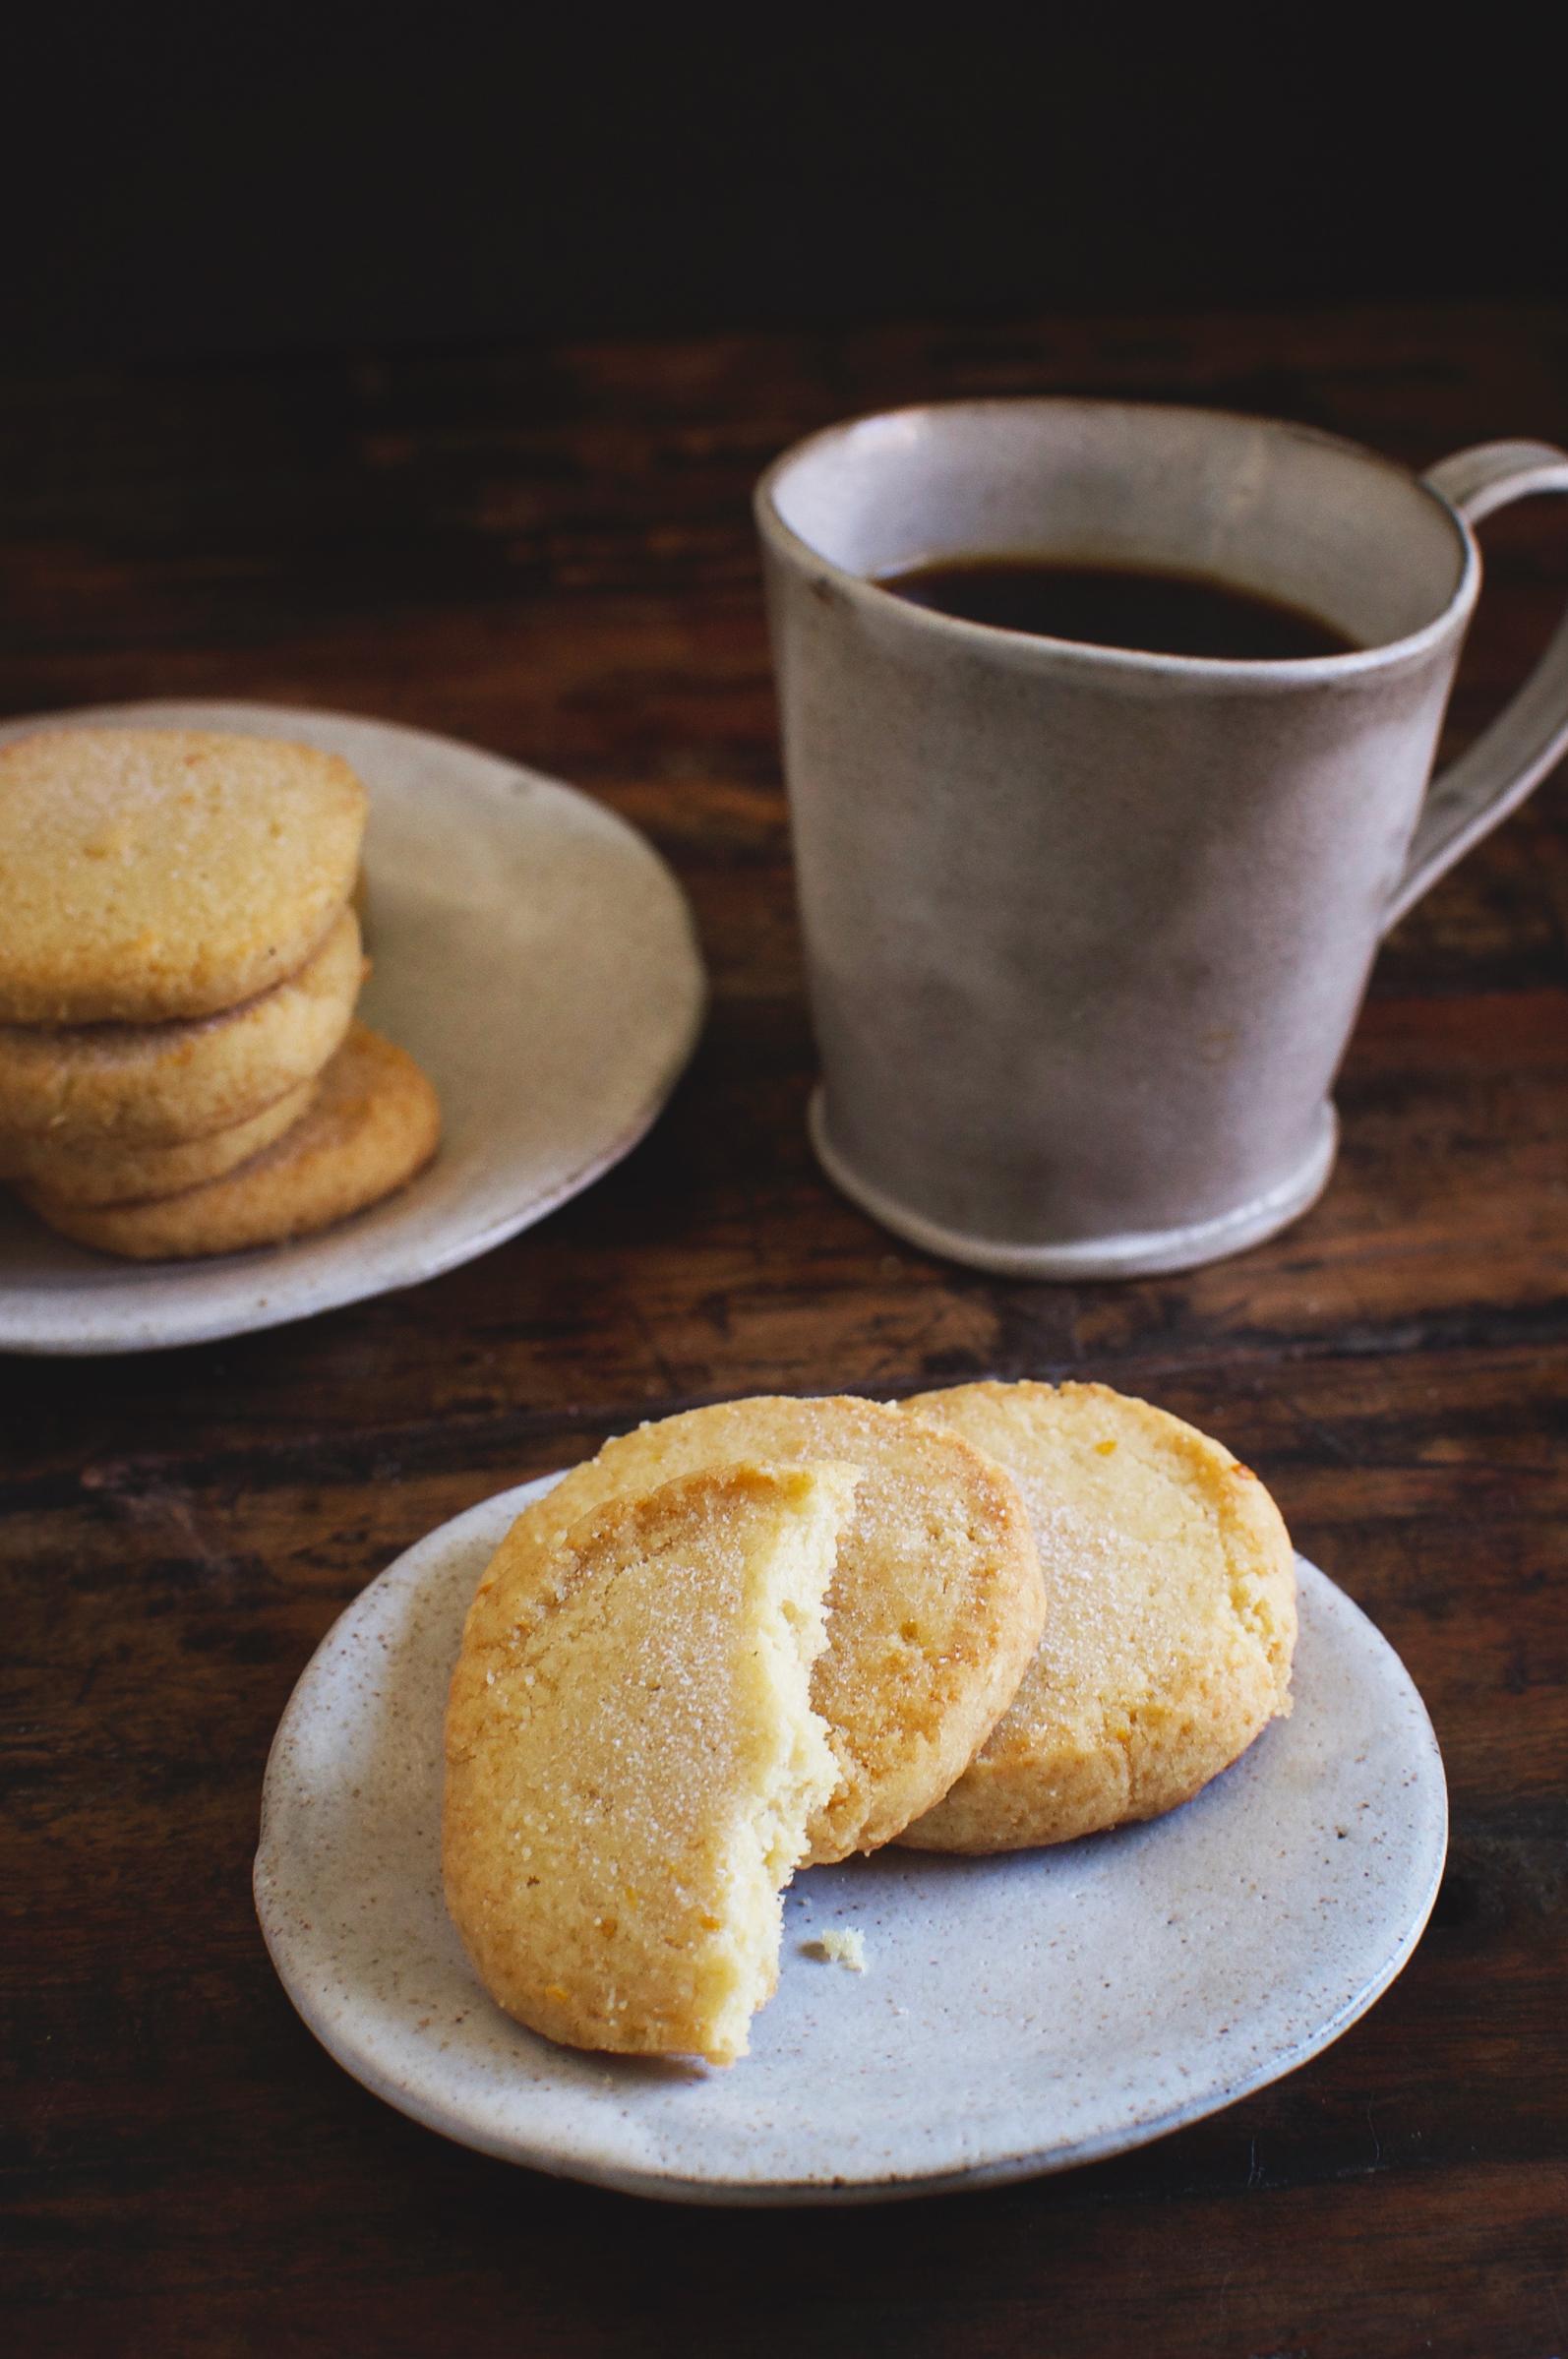  No sugar? No problem! These cookies are still sweet and satisfying.